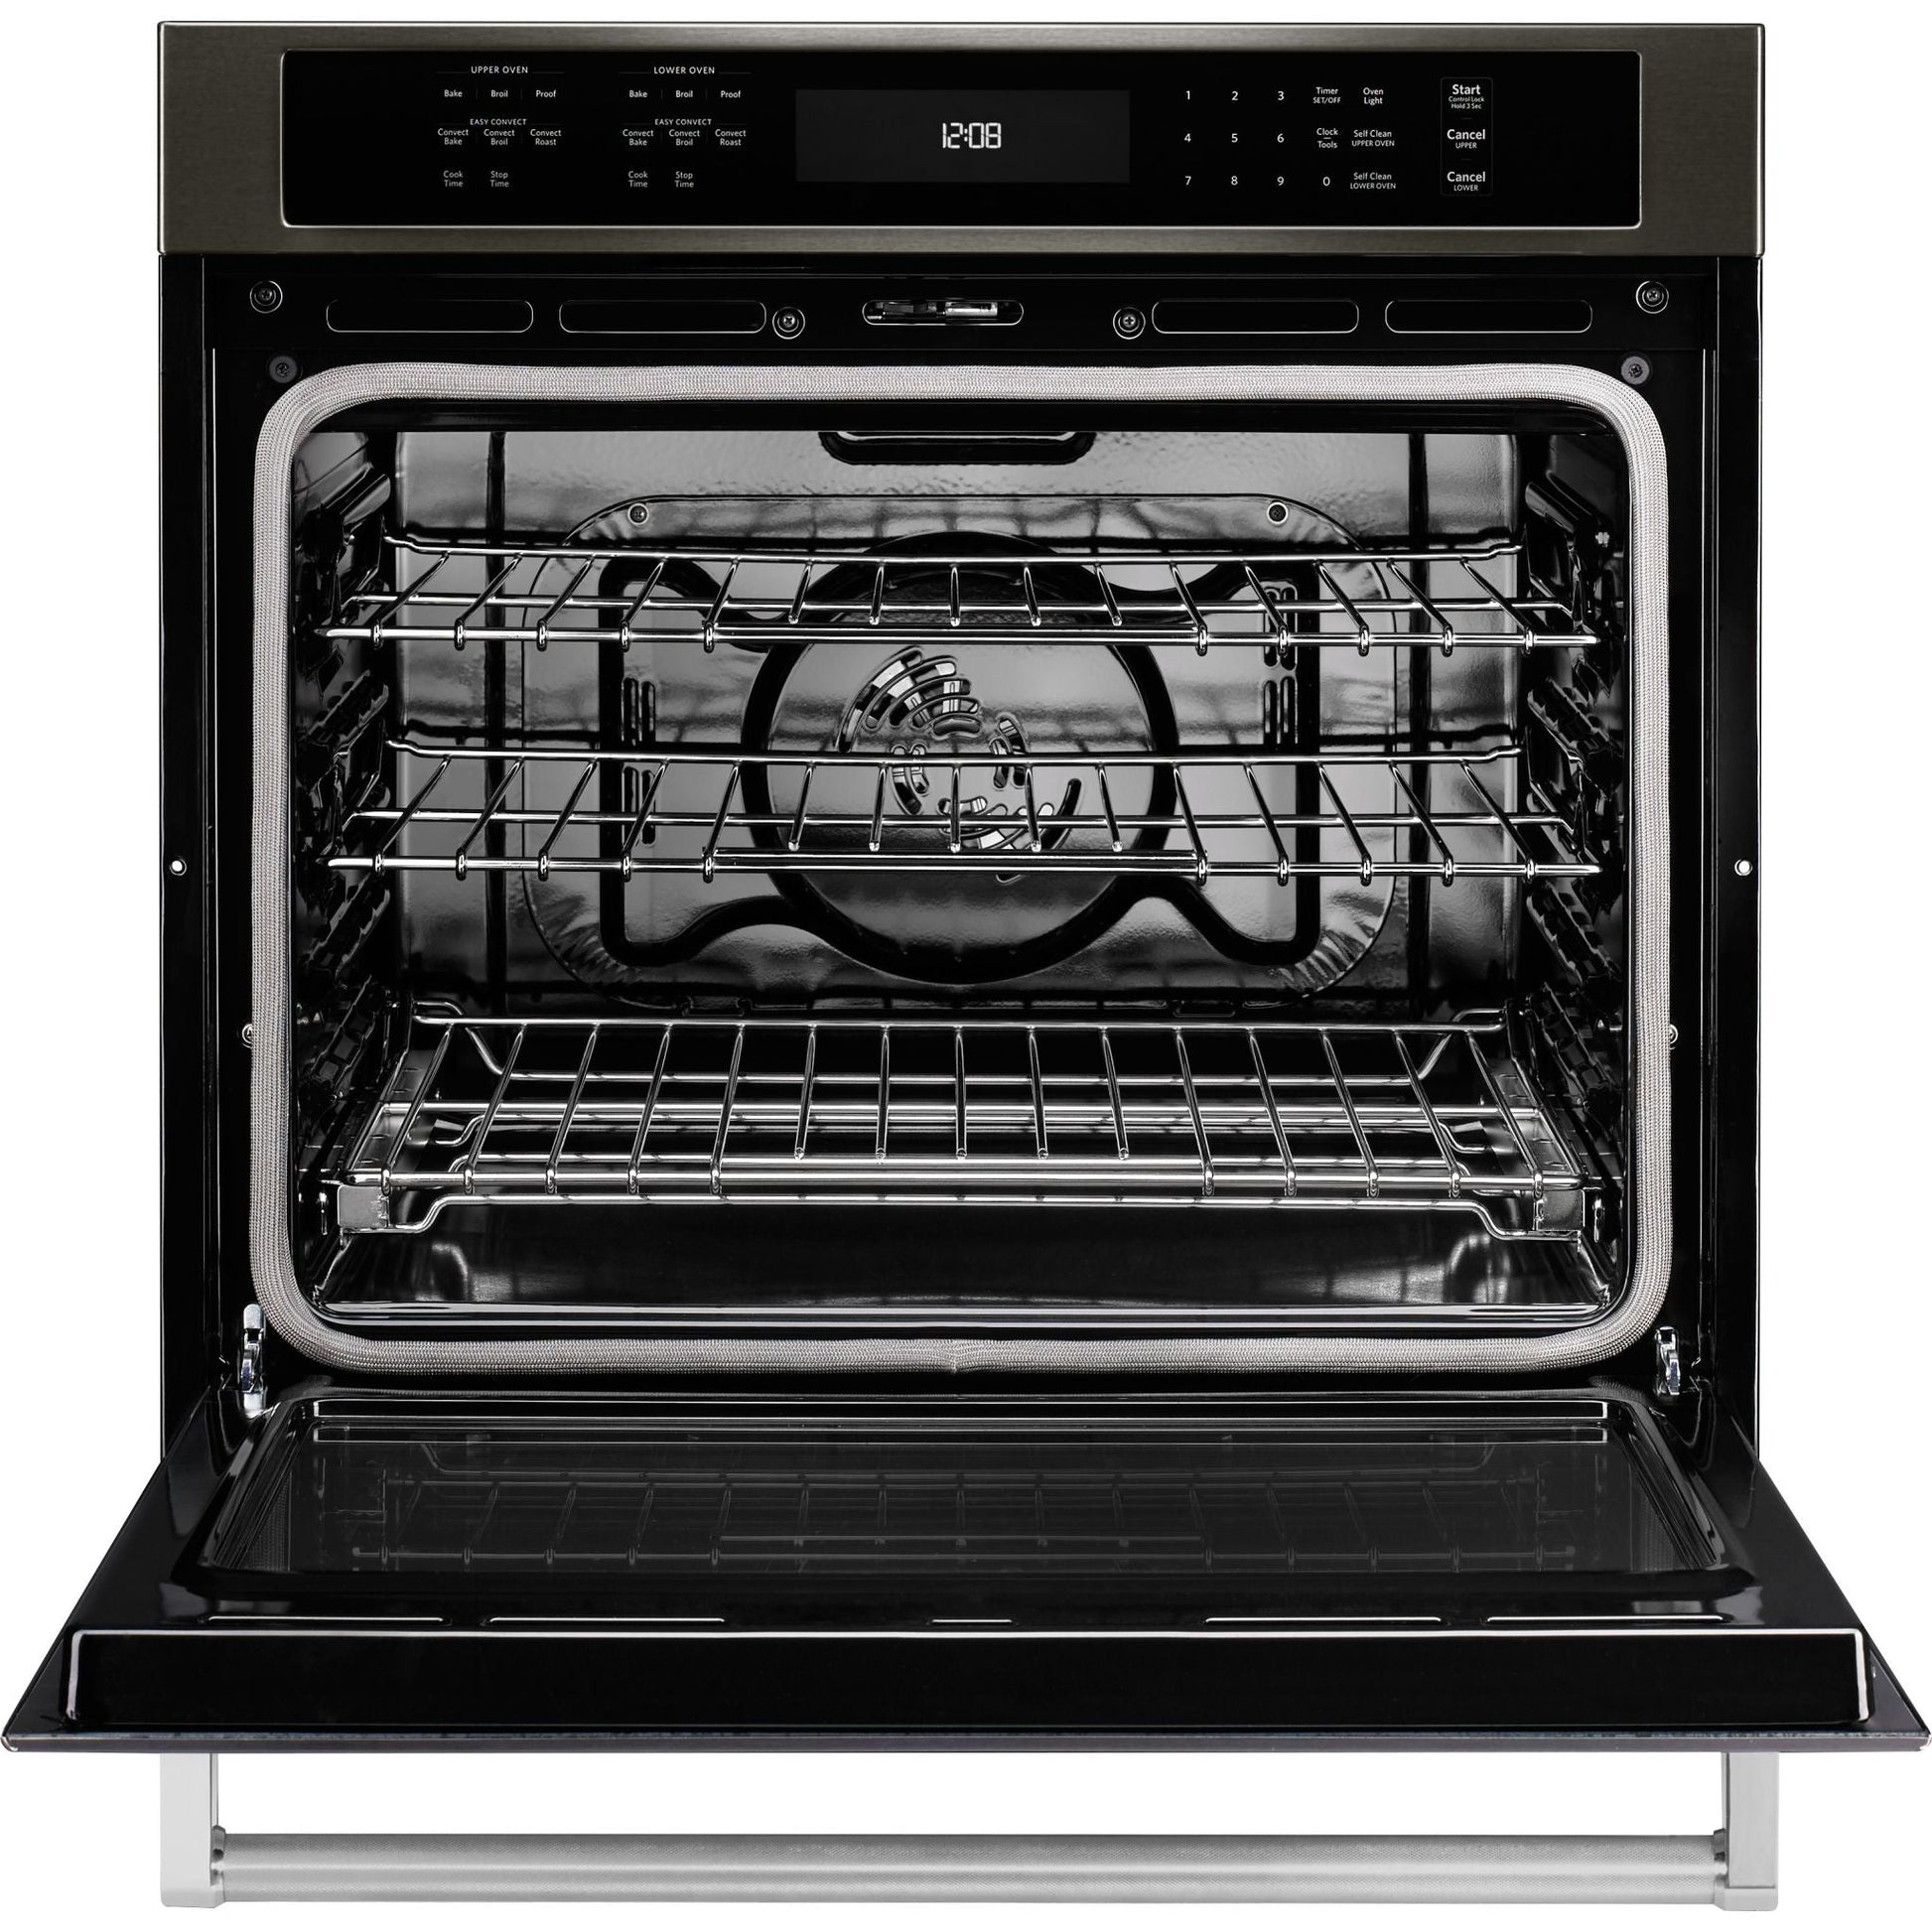 KitchenAid 30" True Convection Wall Oven (KOSE500EBS) - Black Stainless